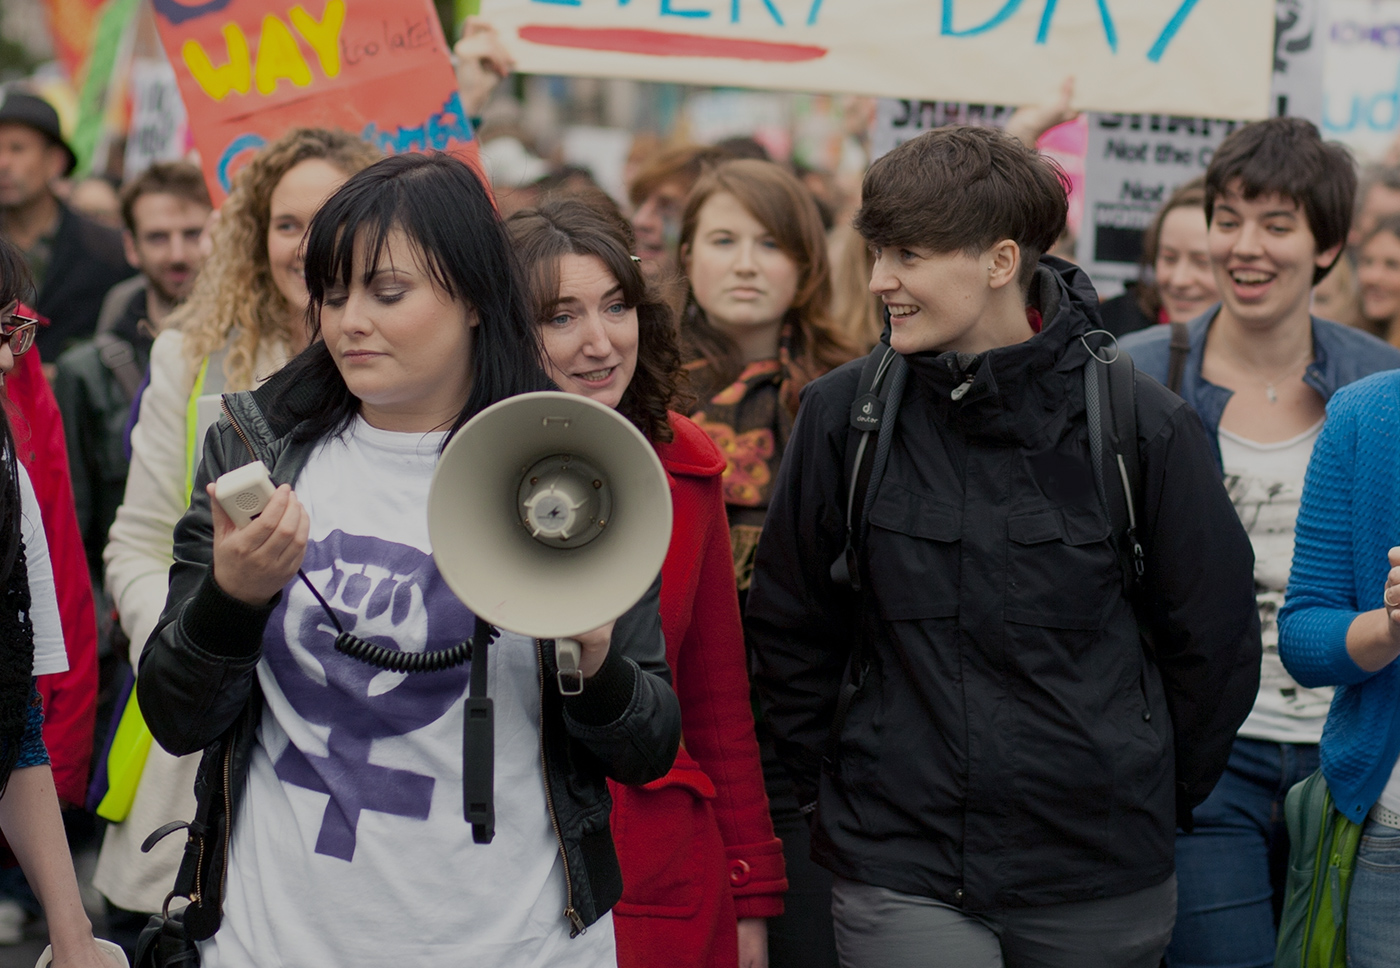 Image of protesters or activists led by a young woman with a megaphone